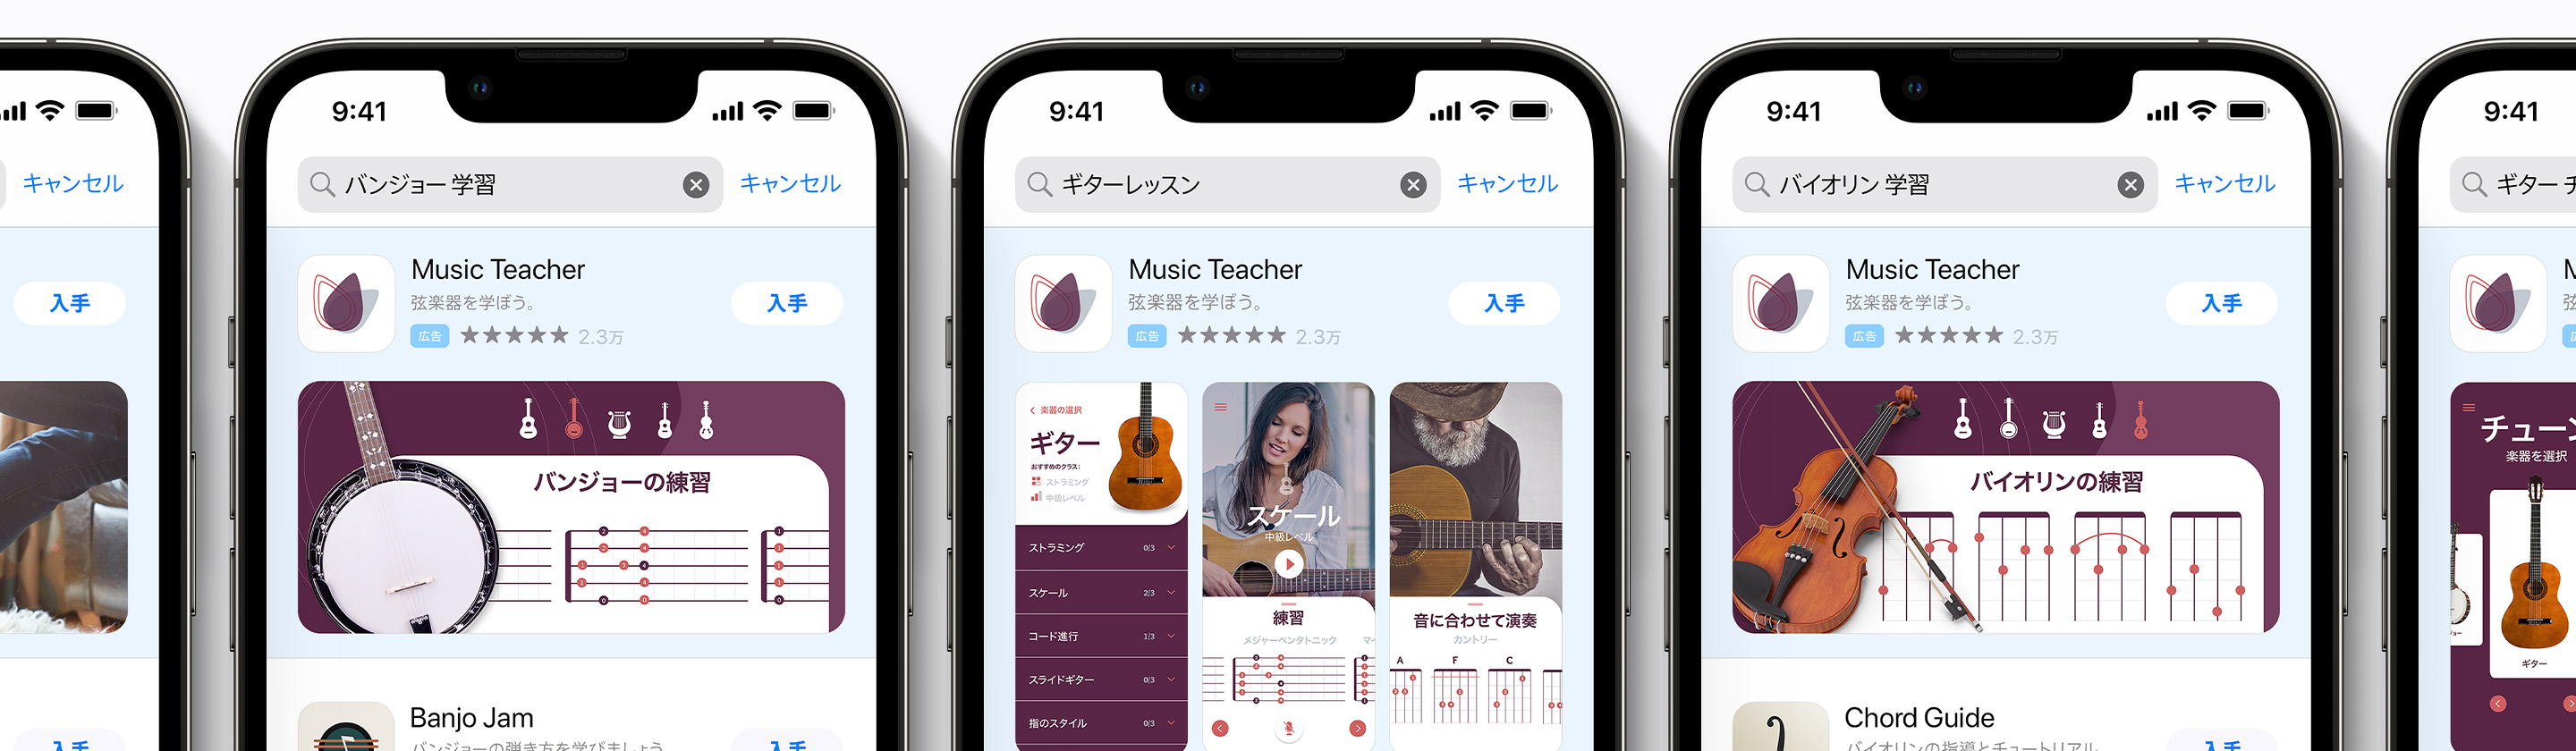 Search resultsキャンペーンの広告の例。